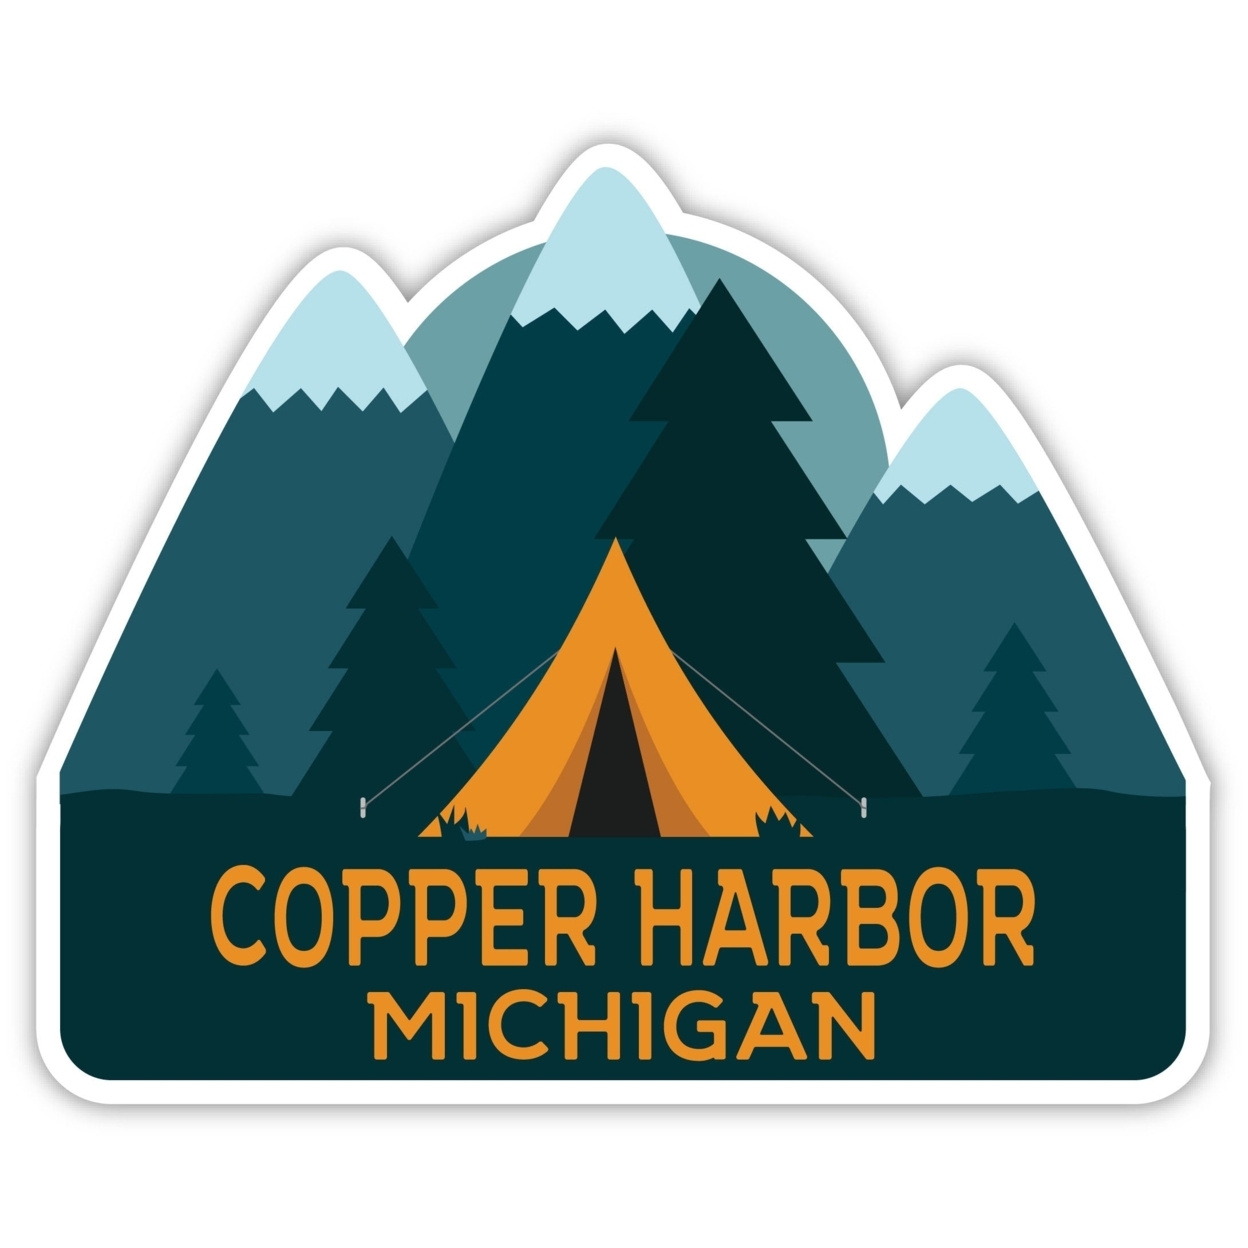 Copper Harbor Michigan Souvenir Decorative Stickers (Choose Theme And Size) - 4-Pack, 2-Inch, Camp Life